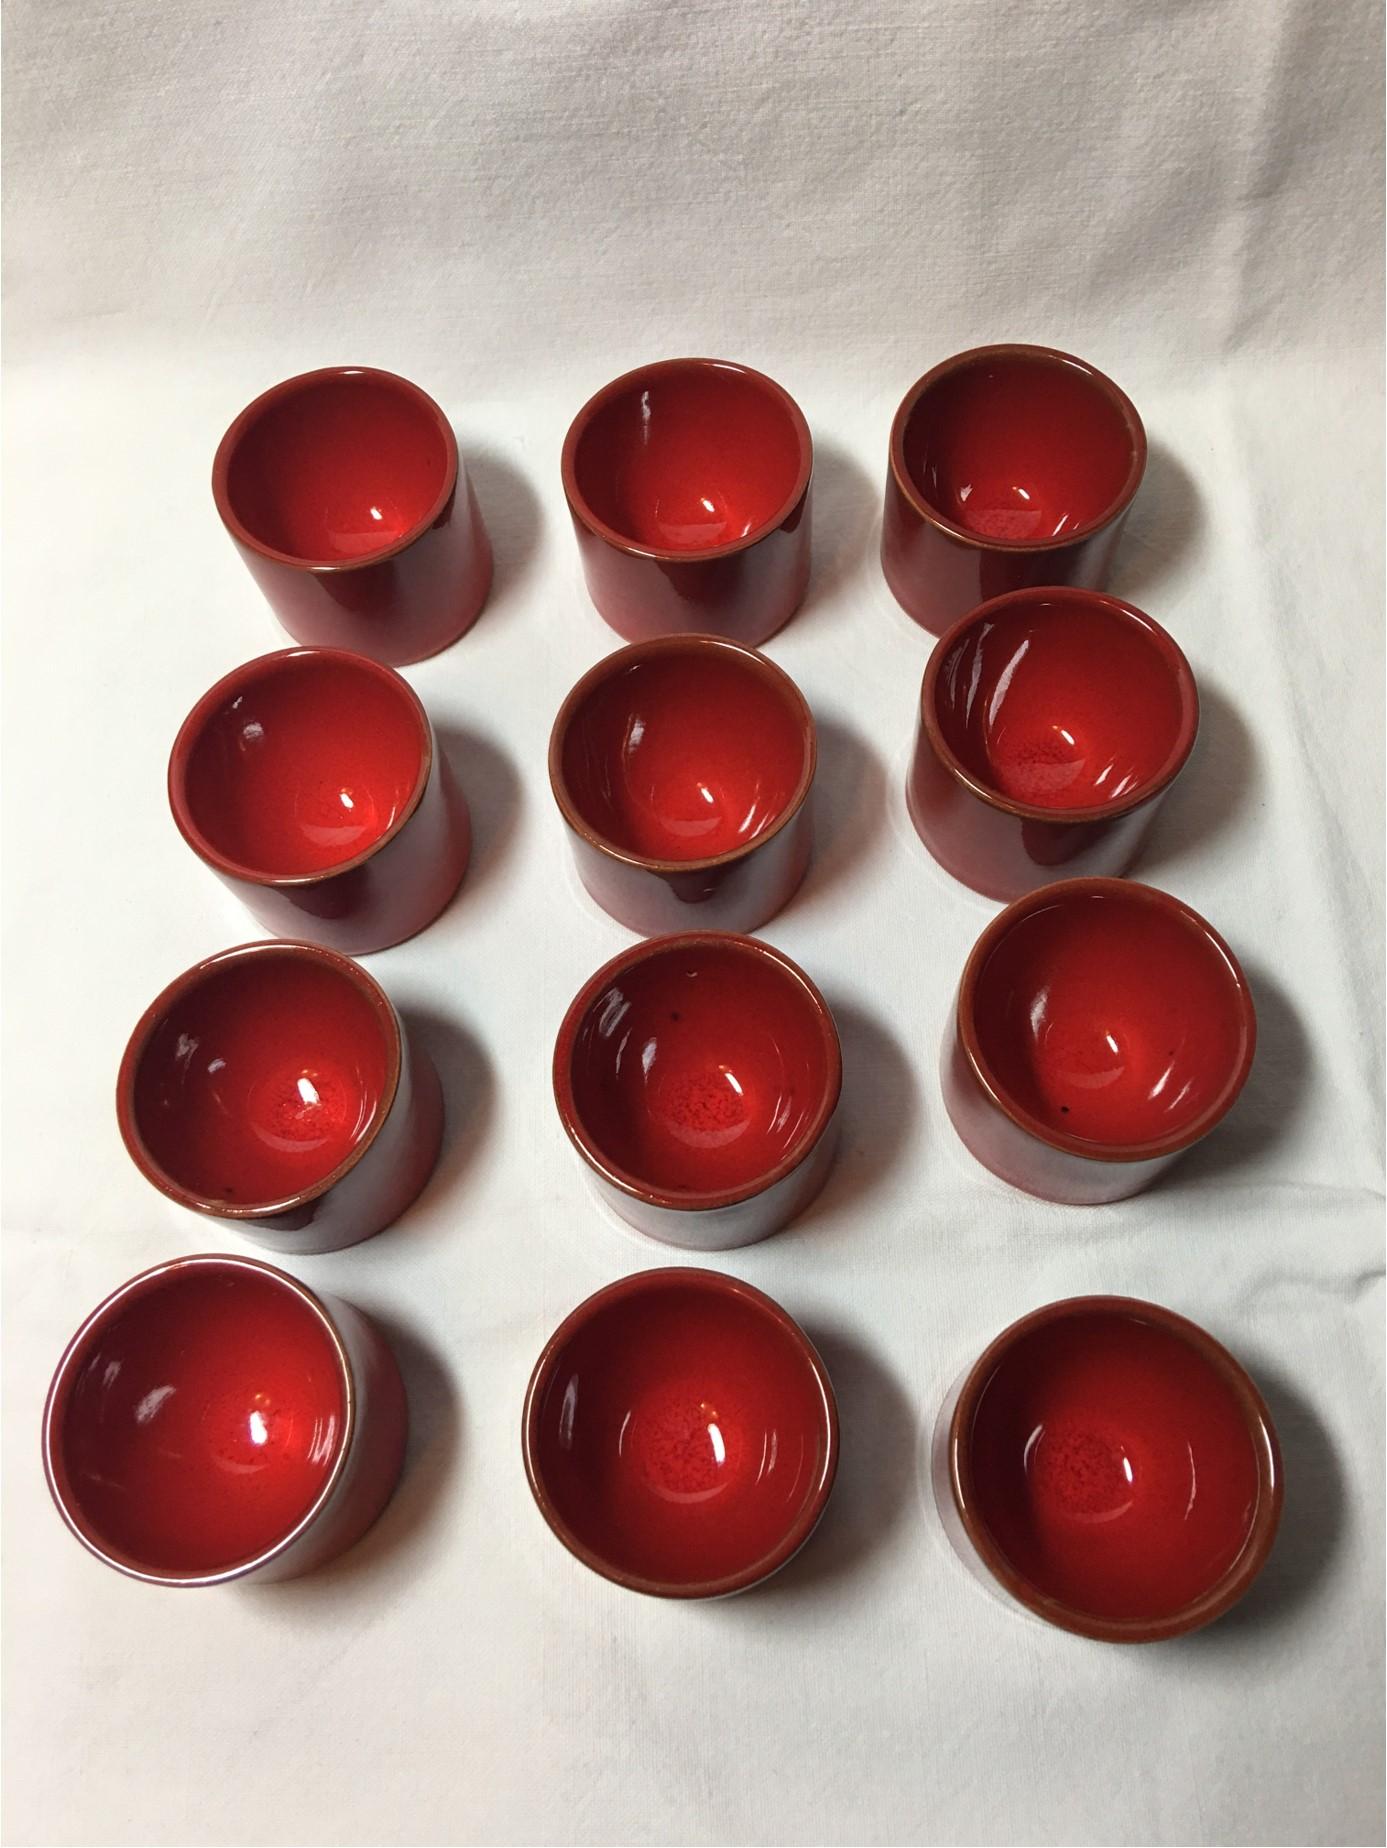 A dozen wonderful Red Bijorn Winblad Rosenthal egg cups discovered recently in an attic. Never used and in excellent condition. These 1960s era egg cups are a set of two dozen that were found yellow and red. We can mix the color or ship solid red